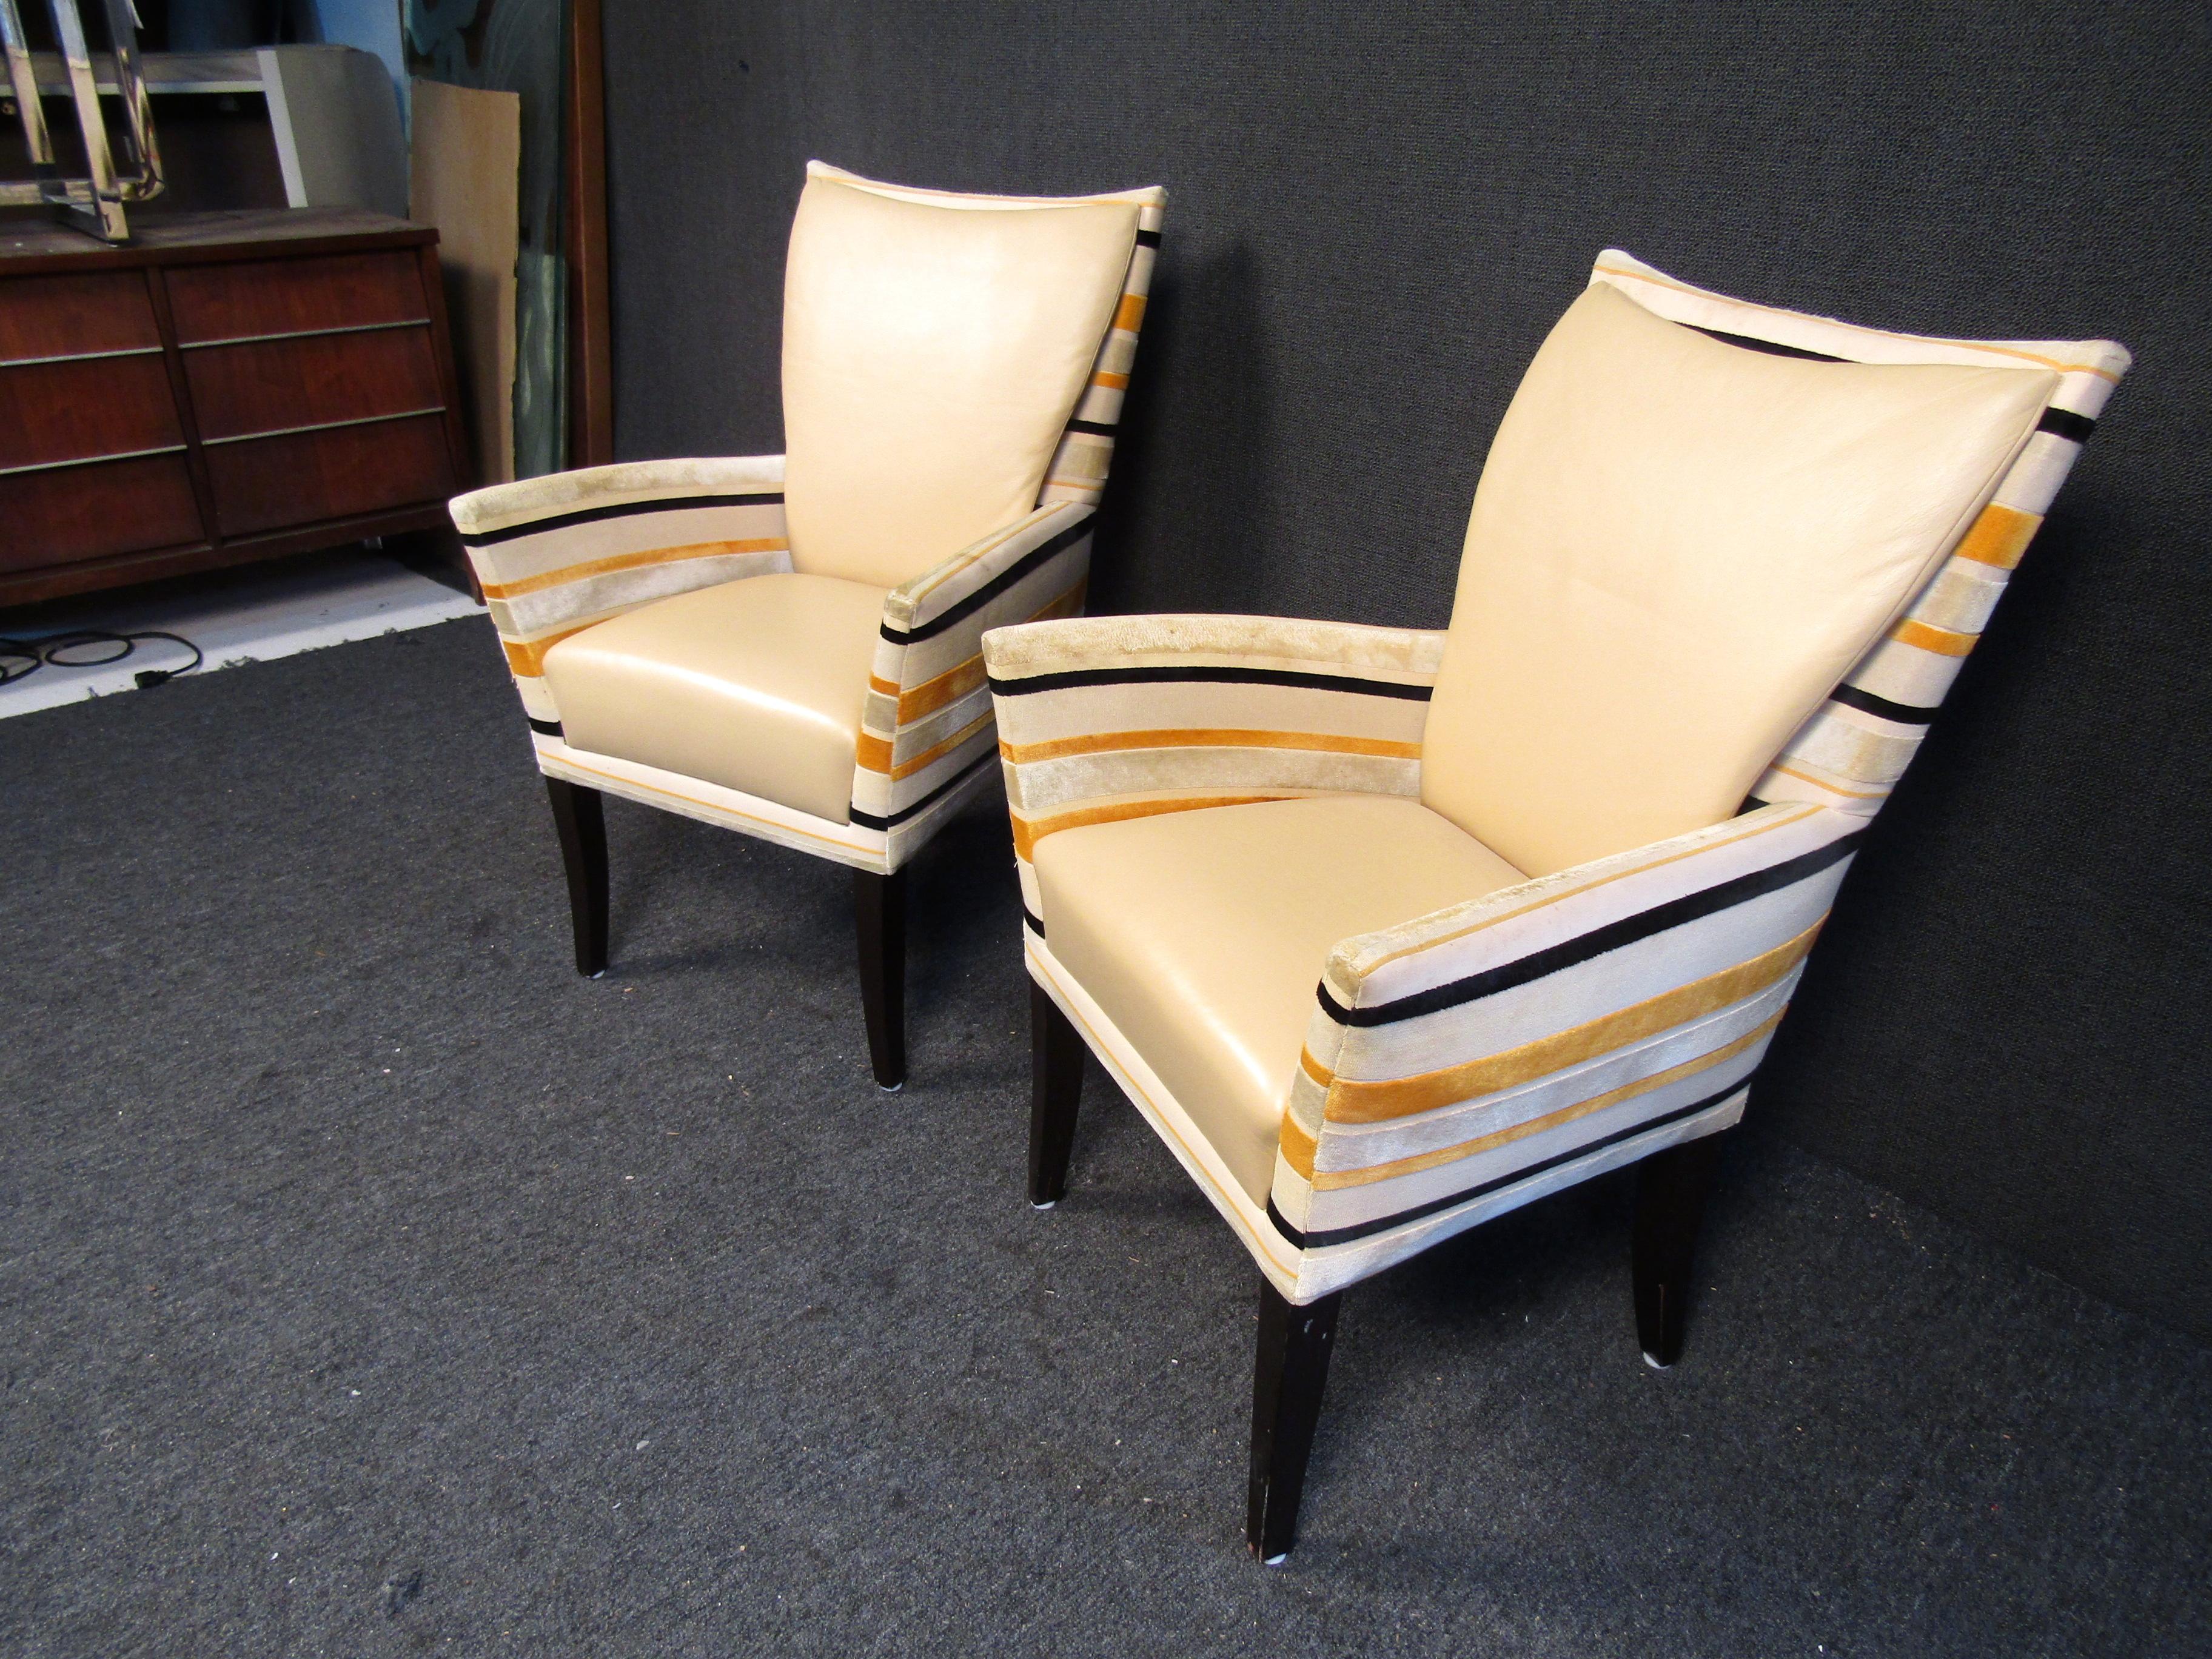 These stylish lounge chairs feature vinyl back and seat rests, striped upholstery, and tapered wooden legs. If you are looking to furnish a space with retro style seating these would be a perfect addition.

Please confirm item location - NY or NJ